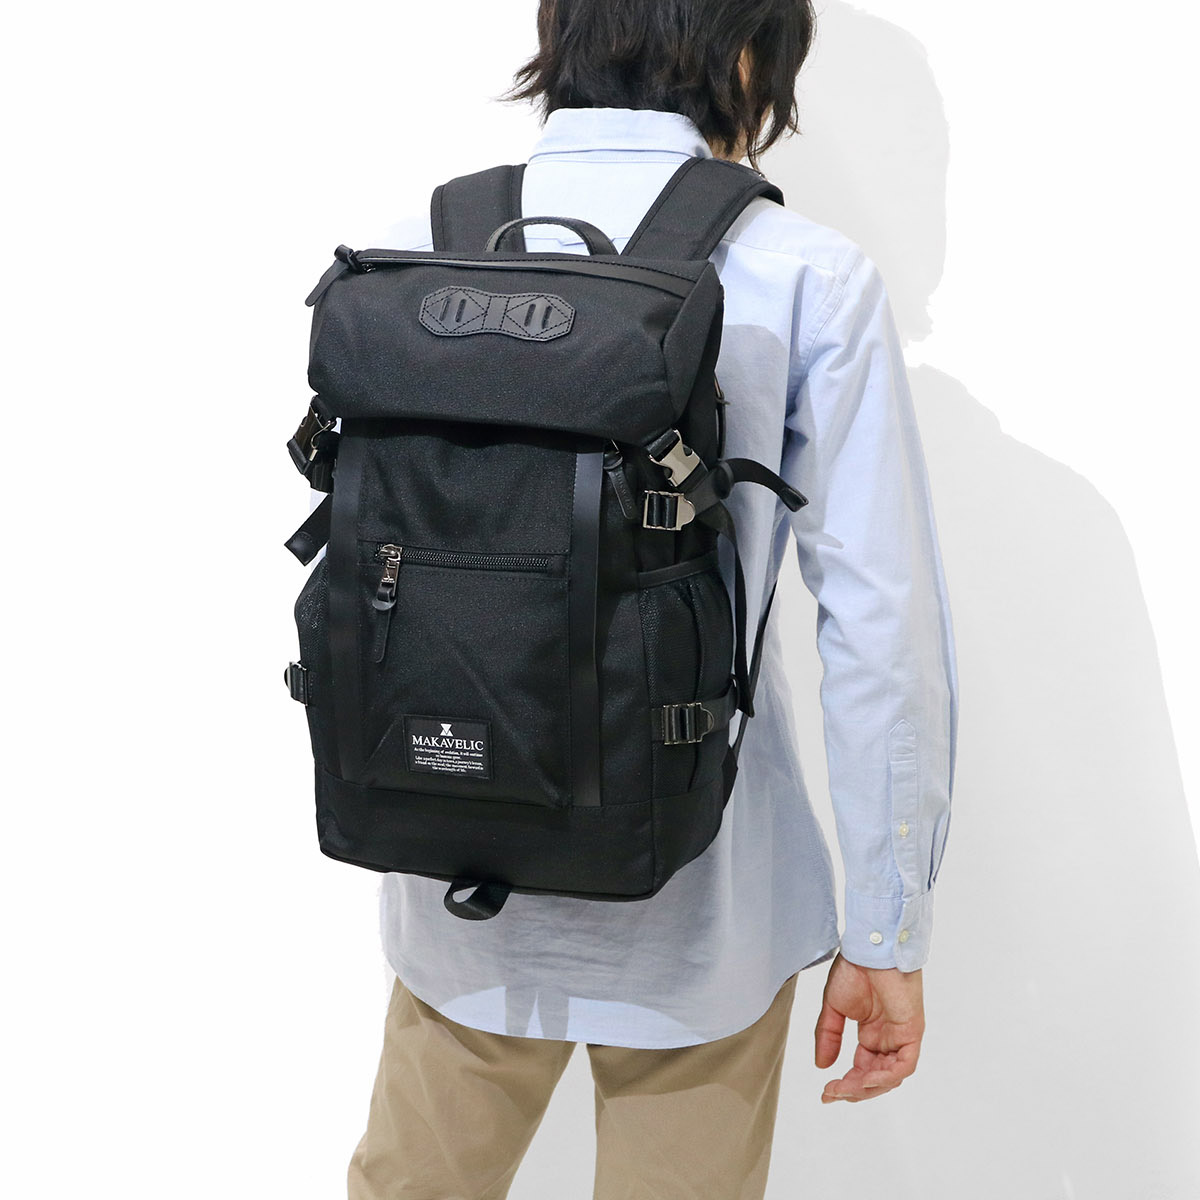 MAKAVELIC マキャベリック CHASE DOUBLE LINE BACKPACK 24L 3106-10107 